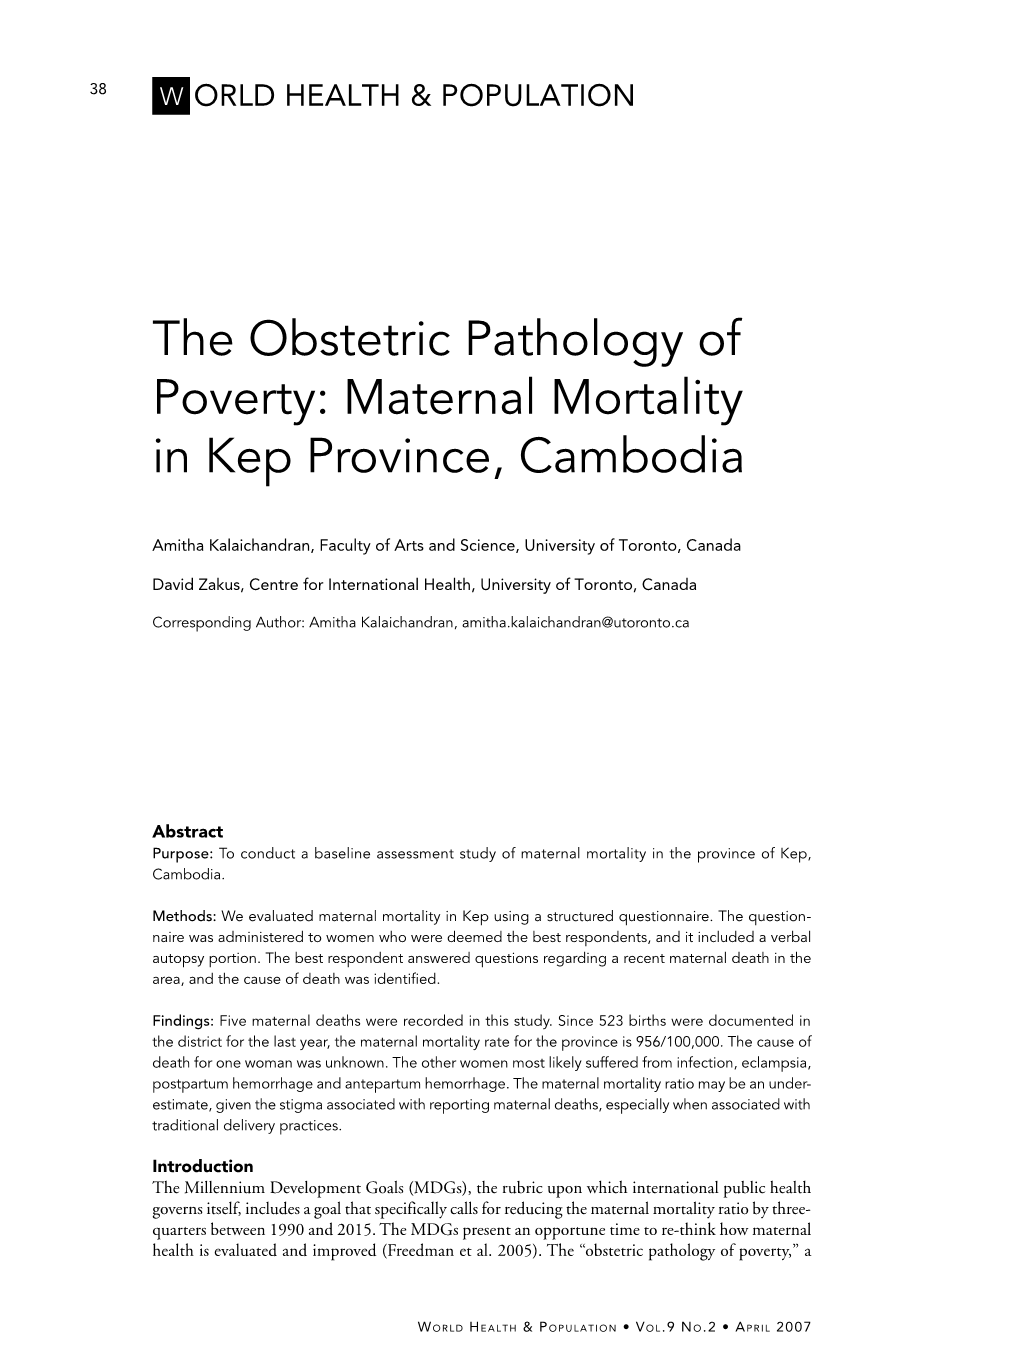 Maternal Mortality in Kep Province, Cambodia